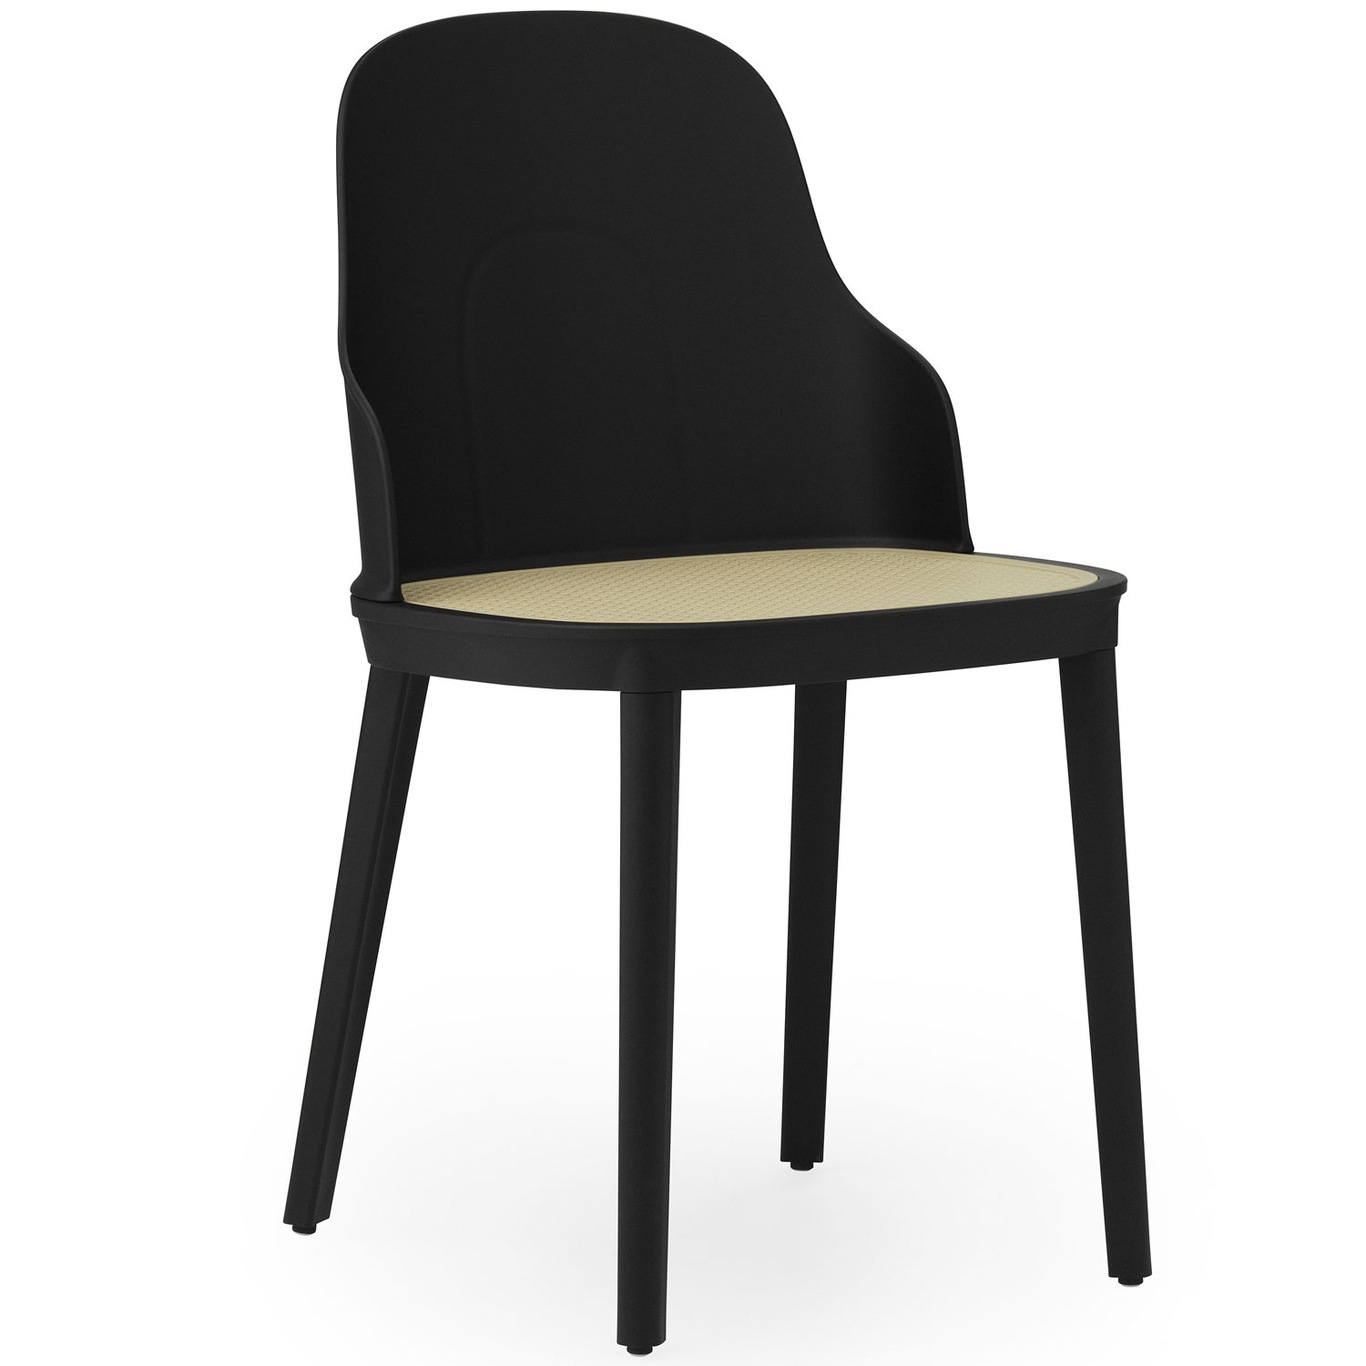 Allez Chair With Moulded Weave, Black